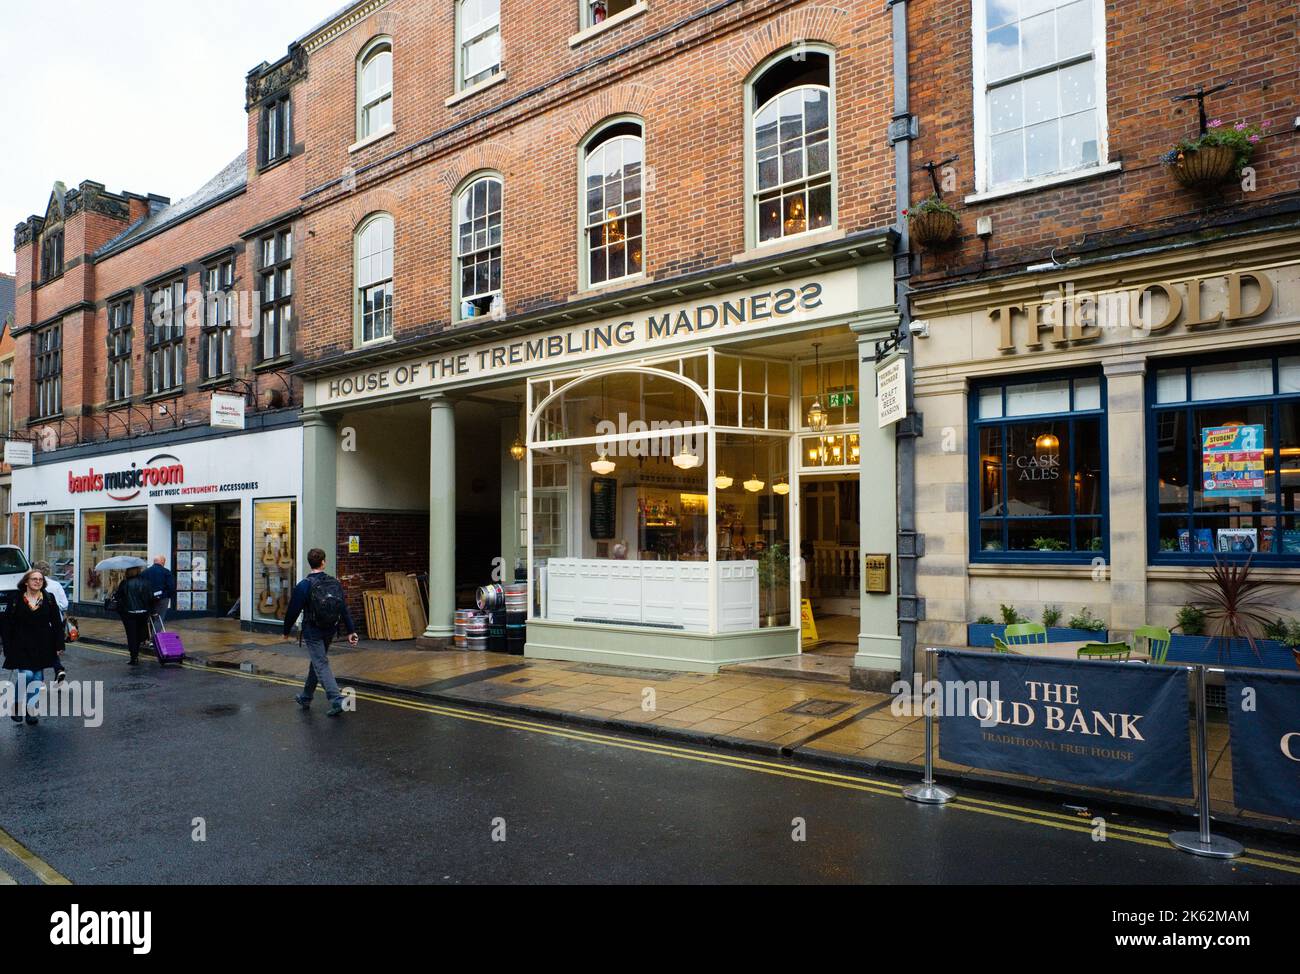 House of the trembling madness bar and restaurant in Stonegate, York Stock Photo